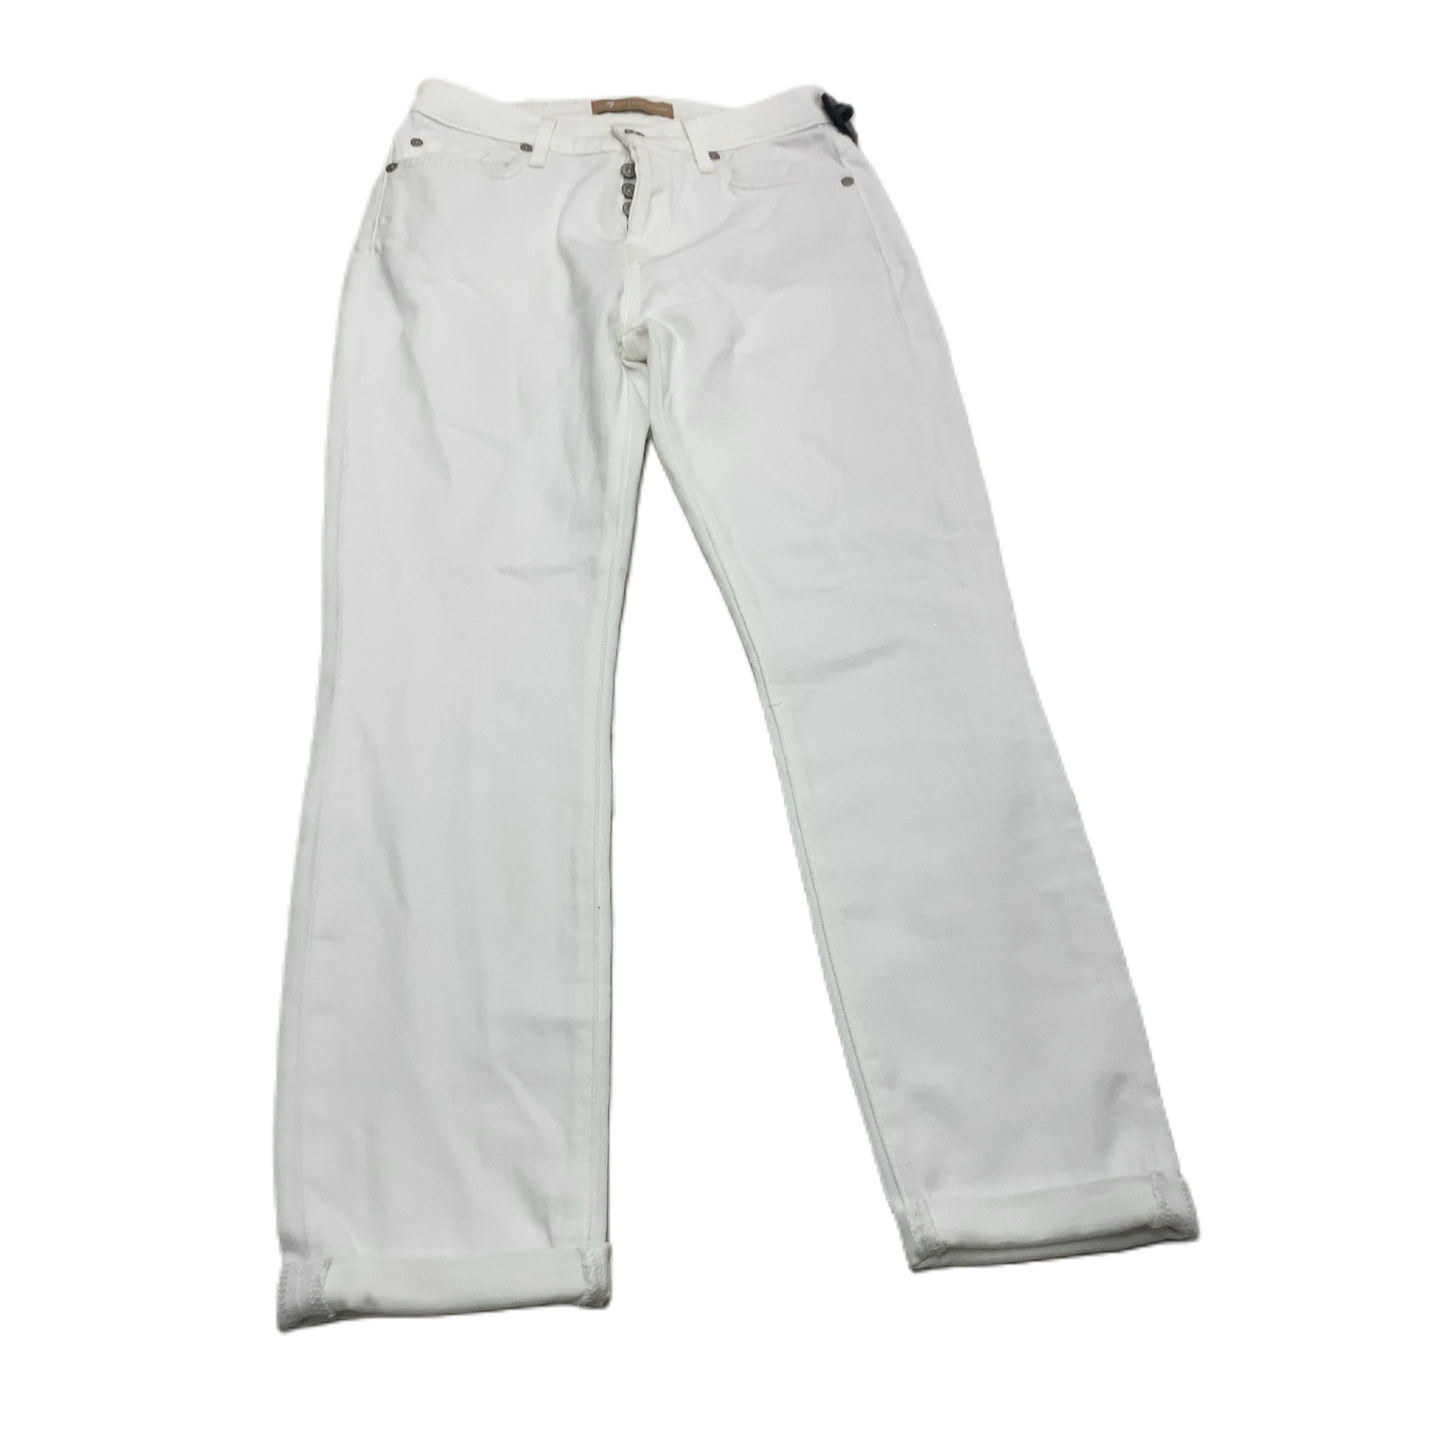 White  Pants Designer By 7 For All Mankind  Size: 0